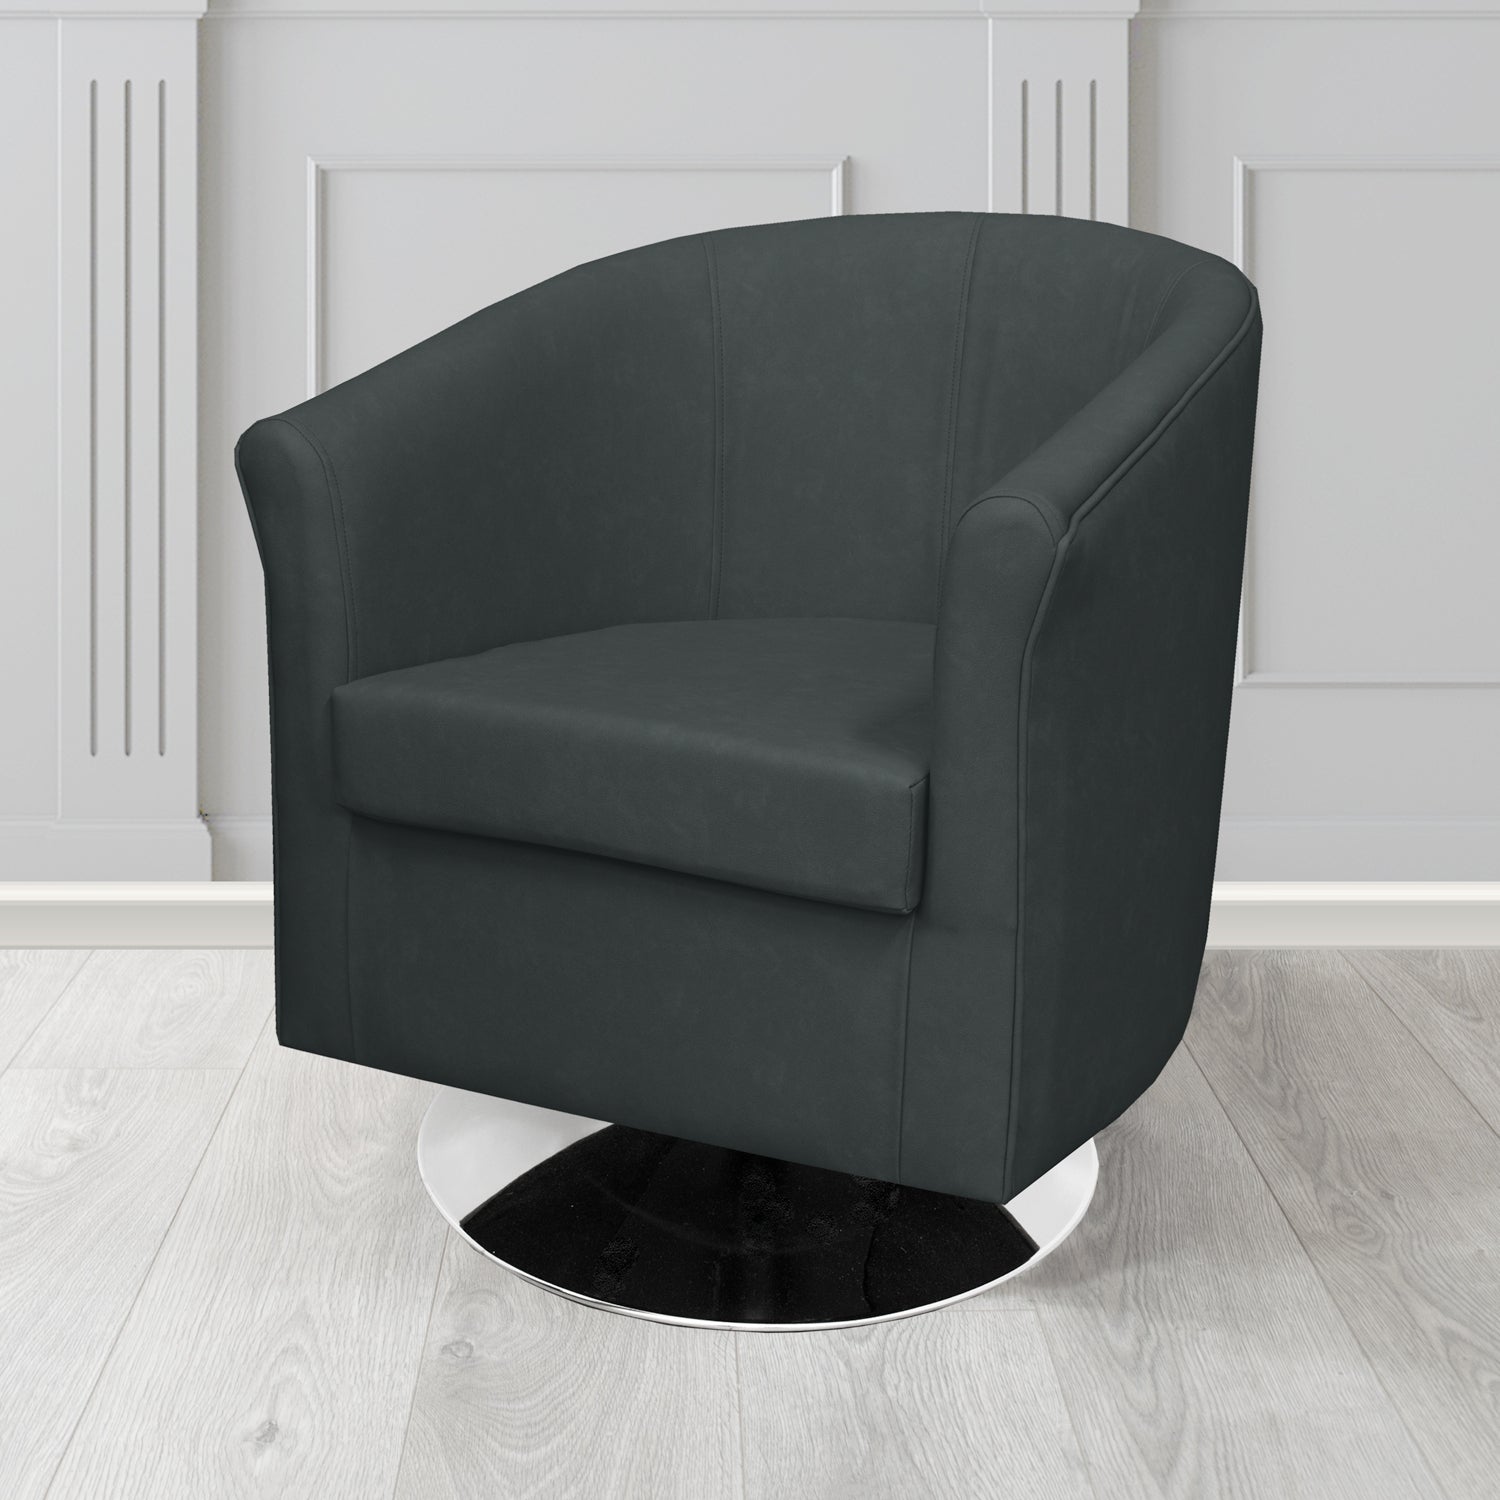 Tuscany Swivel Tub Chair in Infiniti Noir INF1863 Antimicrobial Crib 5 Faux Leather - The Tub Chair Shop